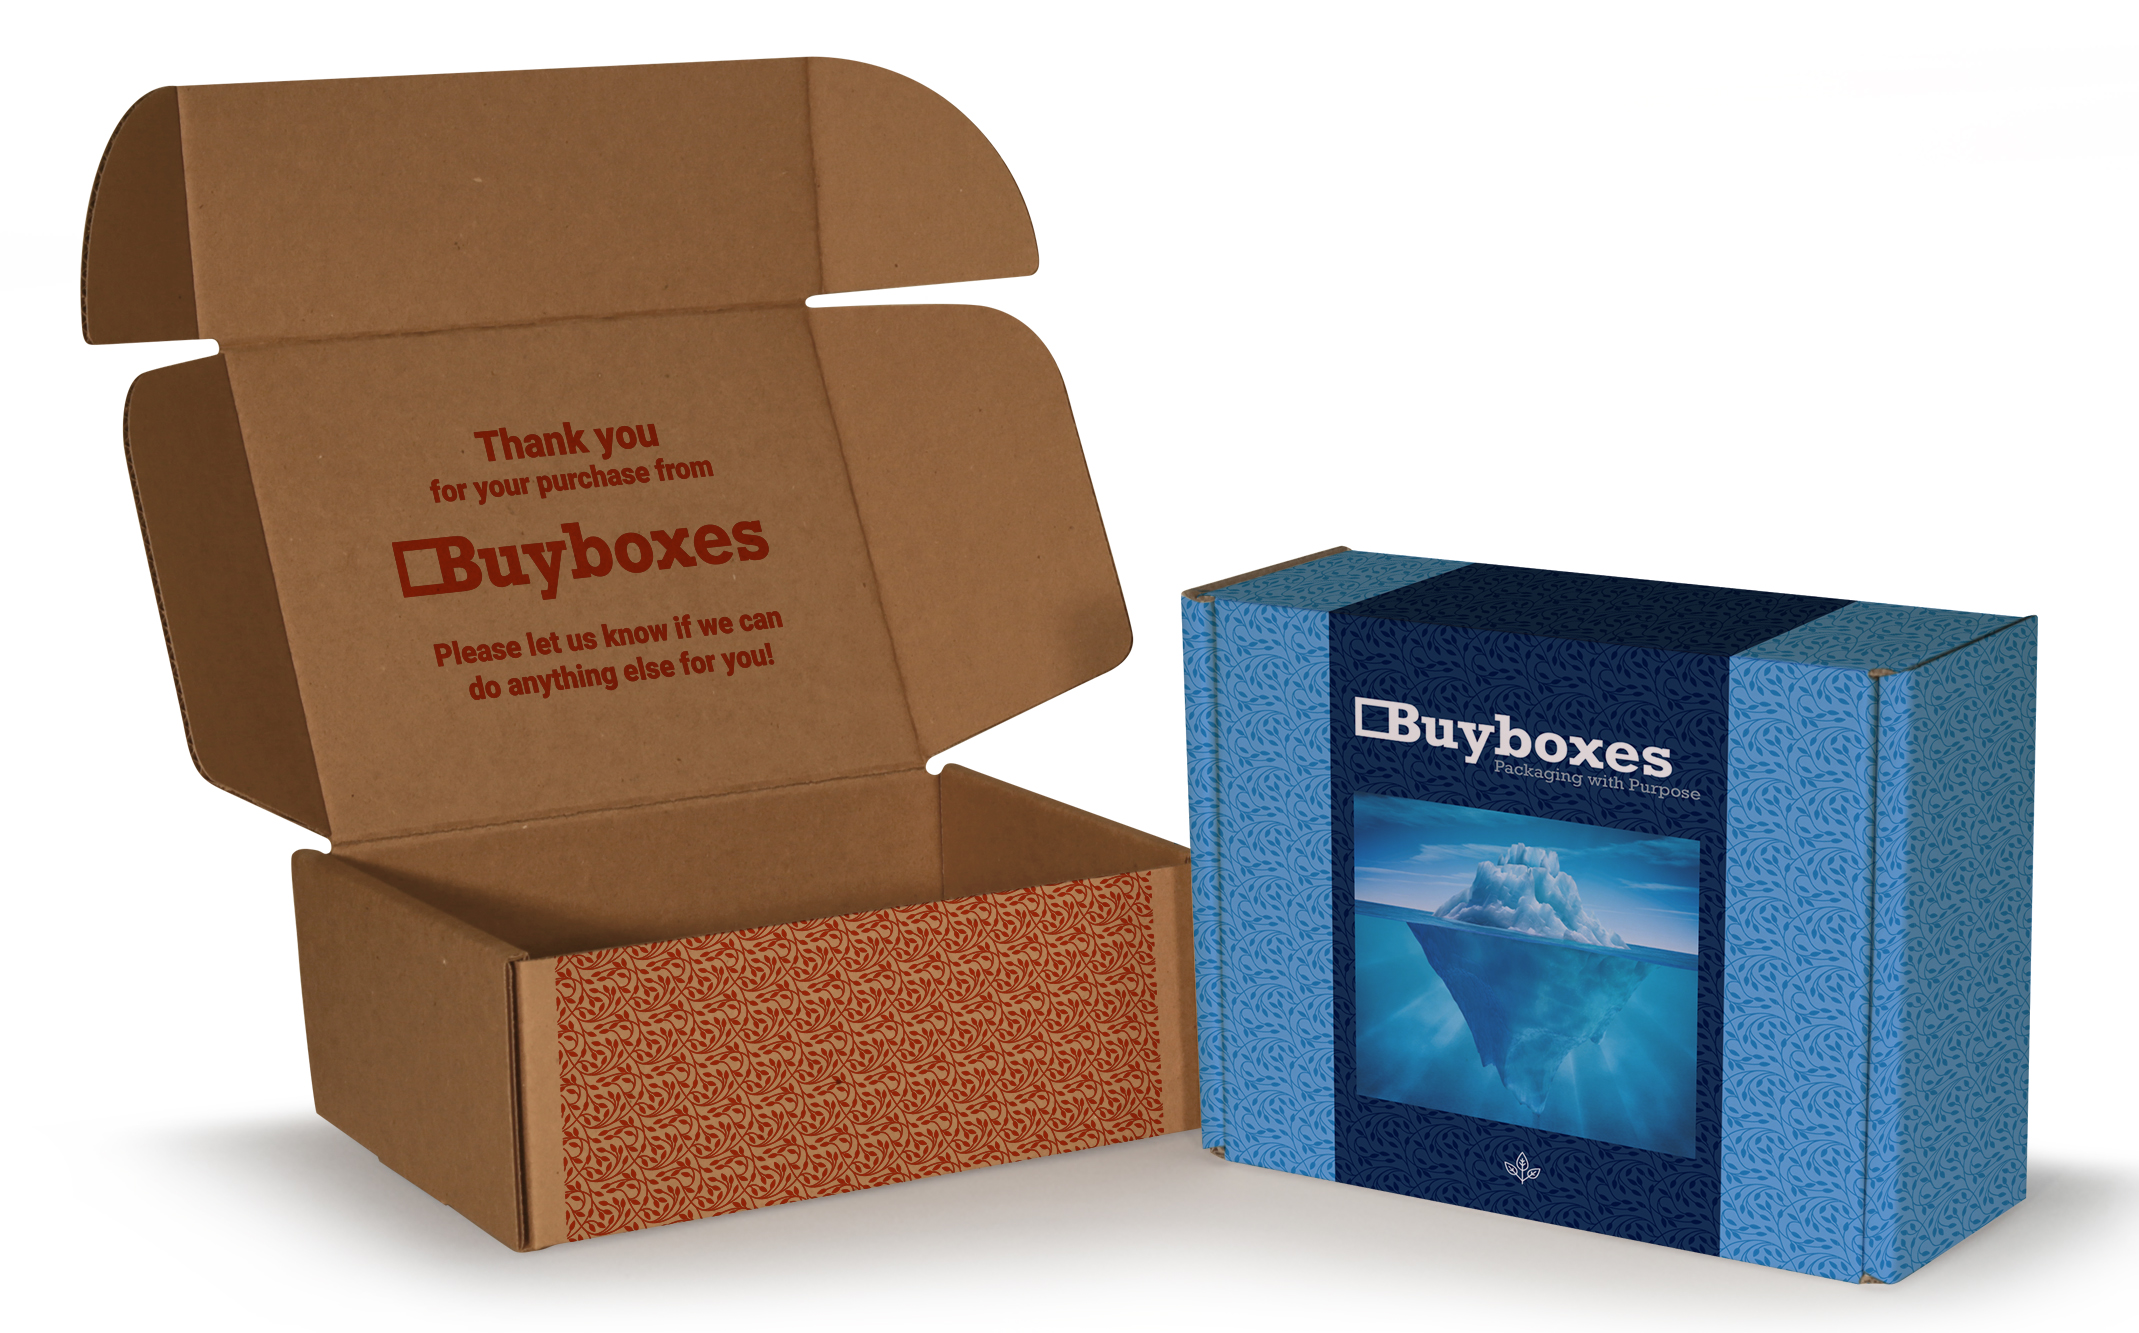 Buyboxes blue and brown digitally printed mailer boxes